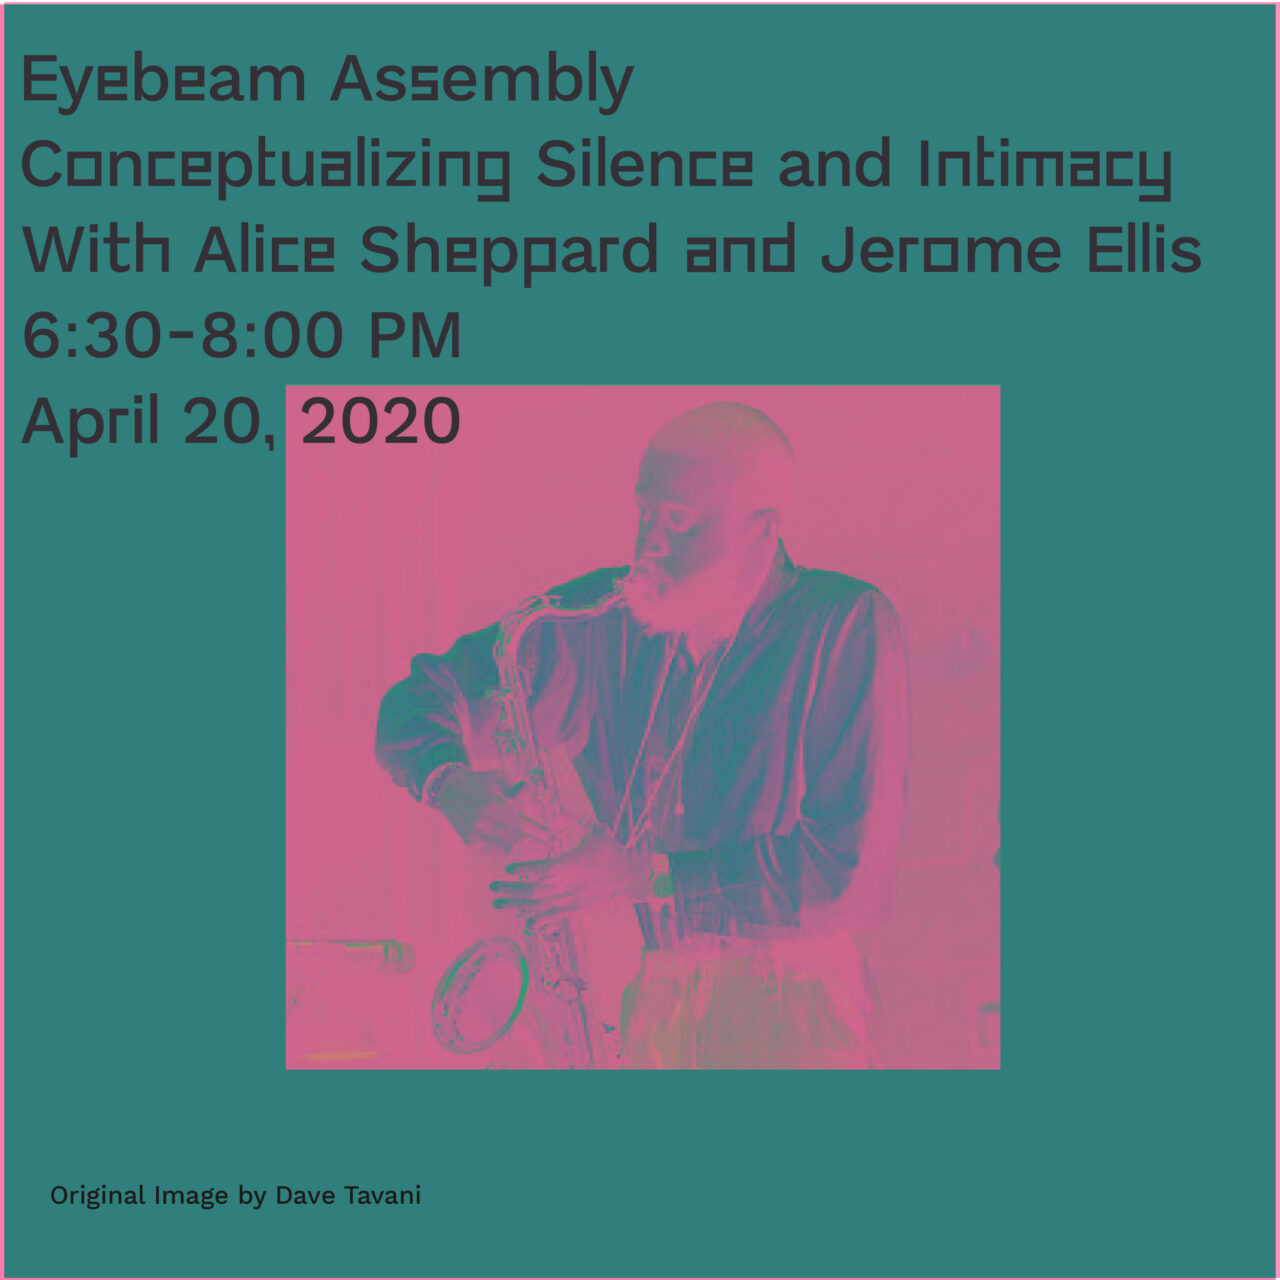 [Image Description: Jerome Ellis playing the sax in a green and pink graphic with event details that read, “Eyebeam Assembly: Conceptualizing Silence & Intimacy with Jerome Ellis and Alice Sheppard. April 20, 2020. 6:30-8pm] Photo credit: Dave Tavani